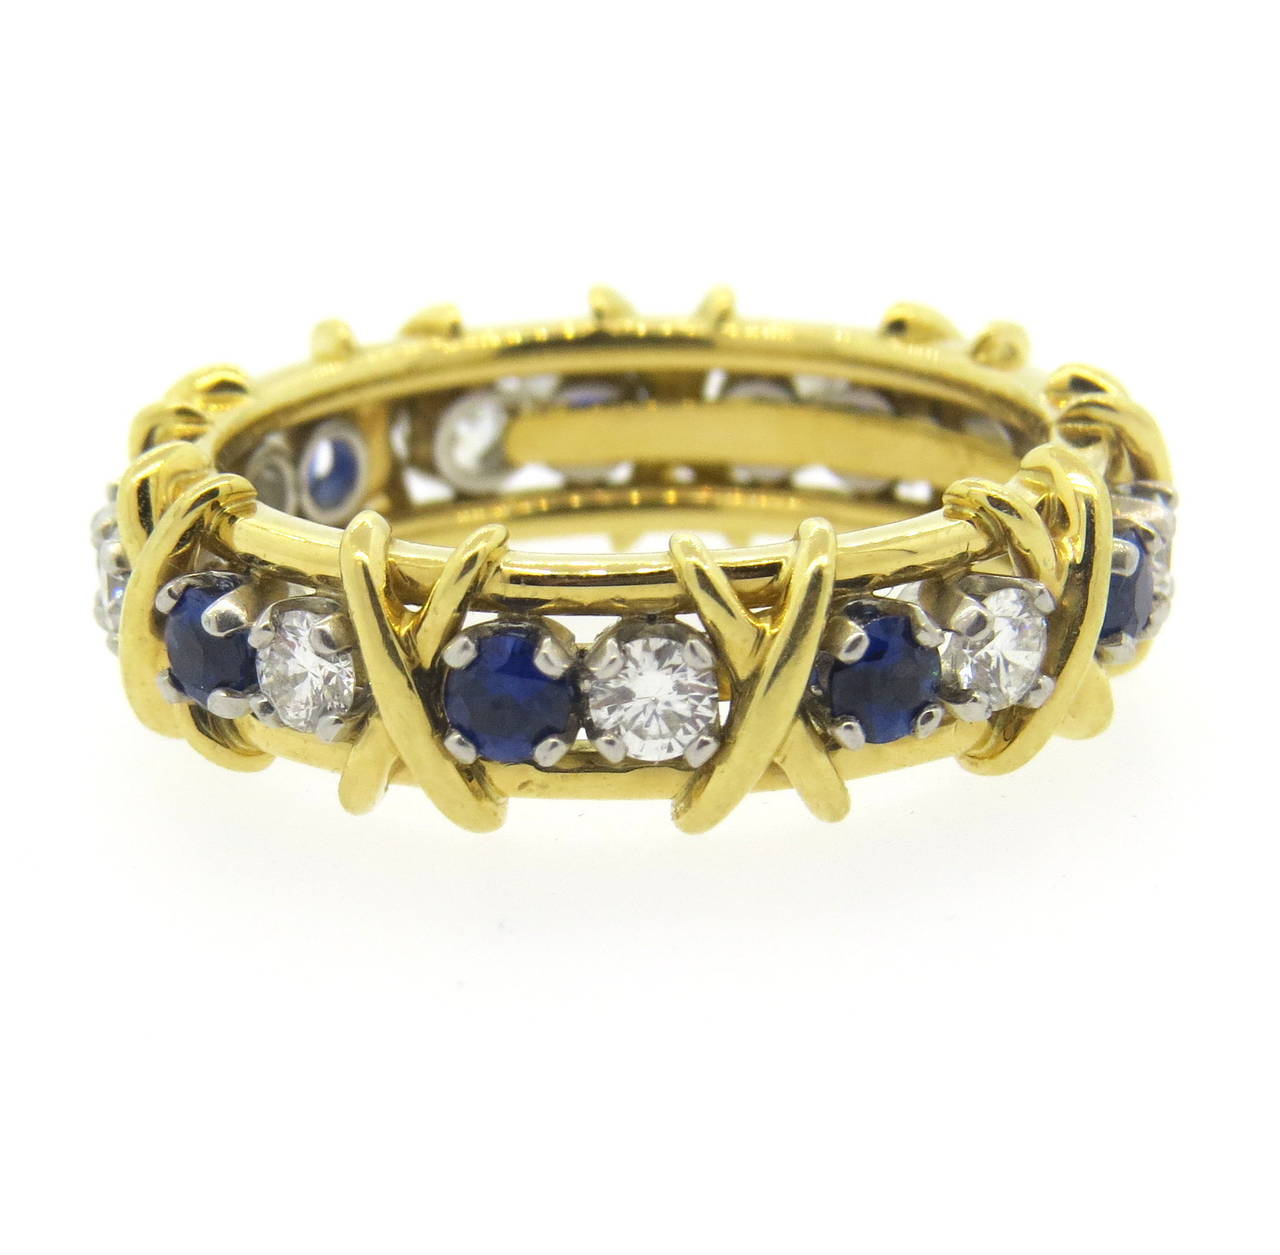 18k gold and platinum ring by Jean Schlumberger for Tiffany & Co. from Sixteen Stone collection. Ring featuring approx. 0.59ctw in G/VS diamonds and 0.75ctw in sapphires. Ring is a size 9 and is 6.8mm wide. Marked Tiffany & Co., Schlumberger